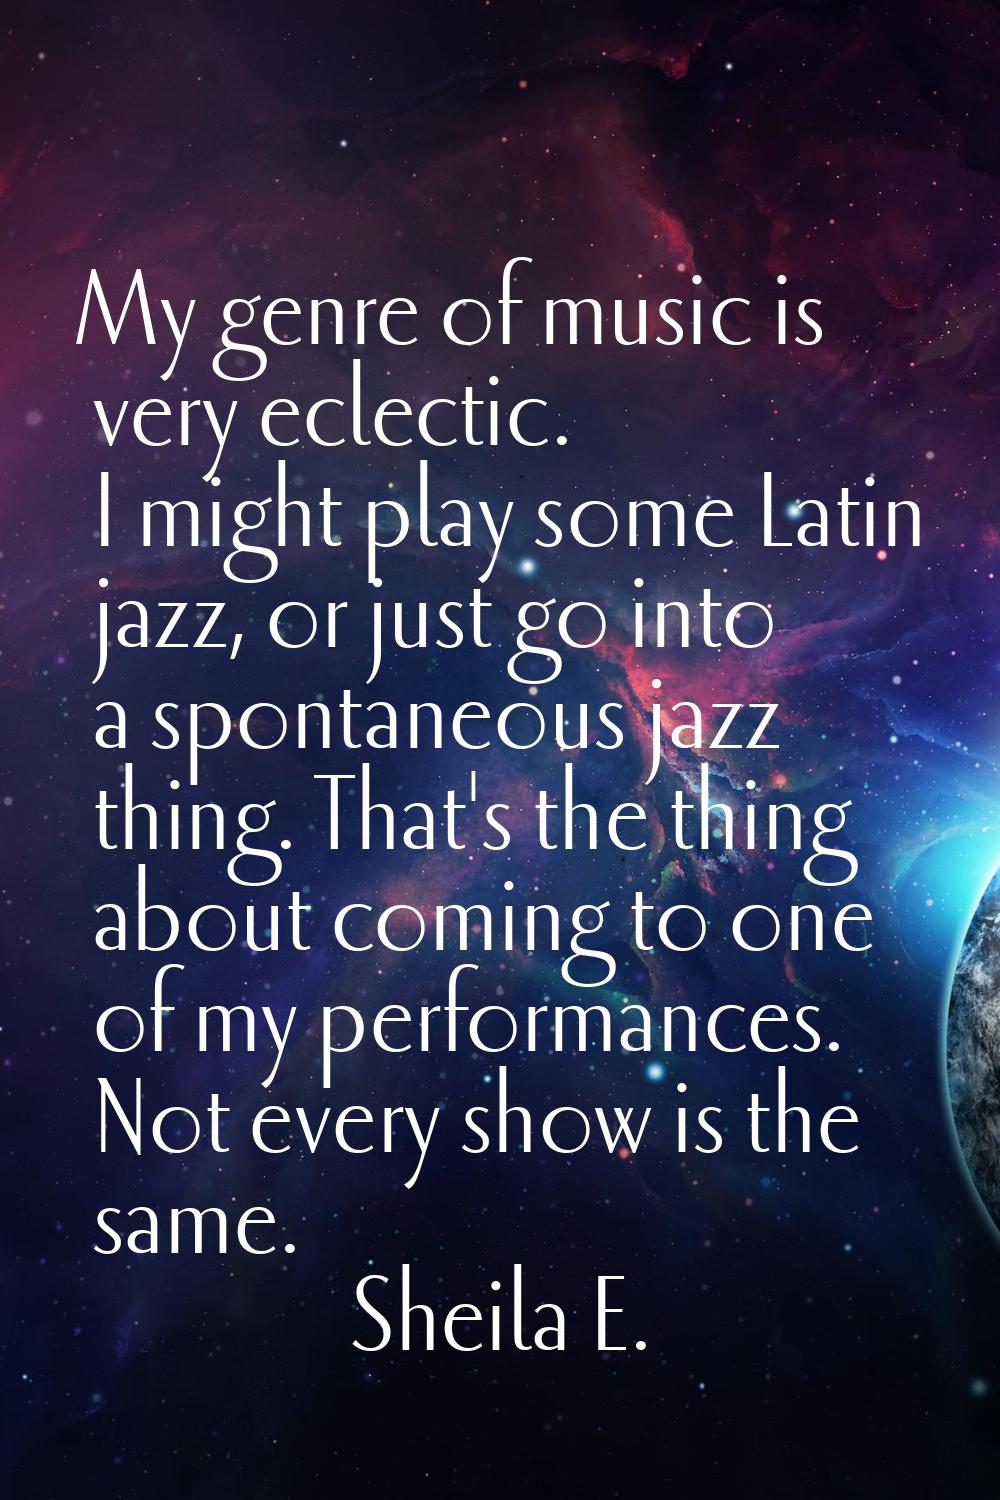 My genre of music is very eclectic. I might play some Latin jazz, or just go into a spontaneous jaz